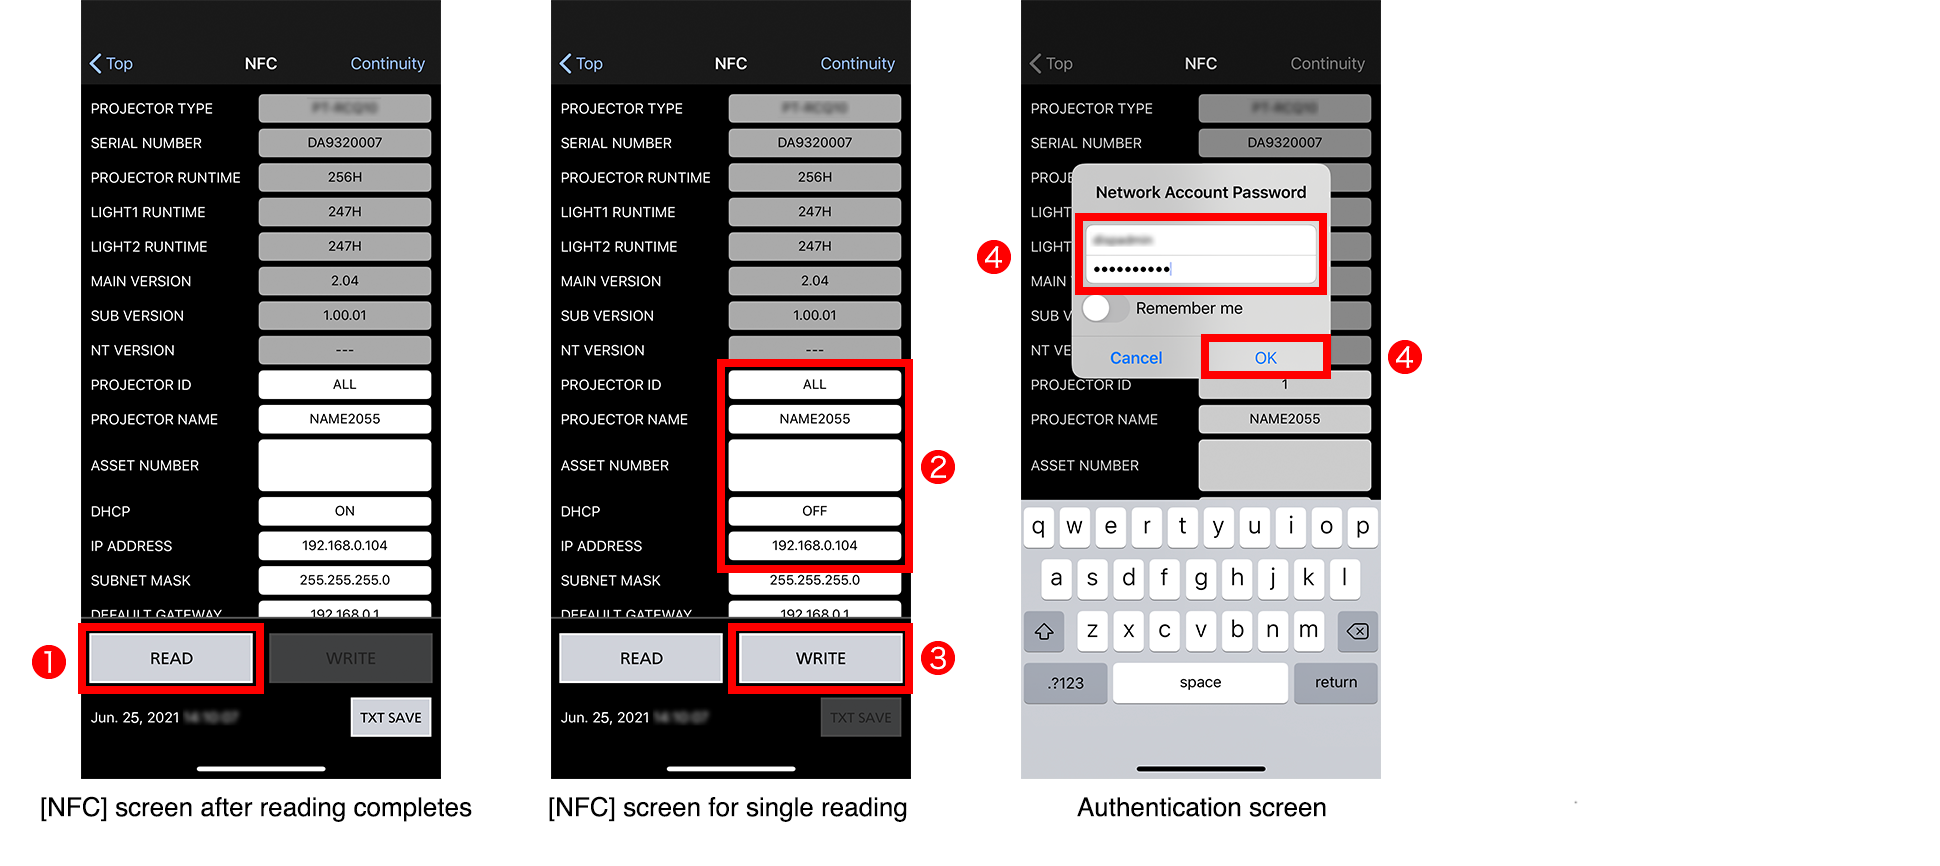 [NFC] screen after reading completes, [NFC] screen for single reading, Authentication screen